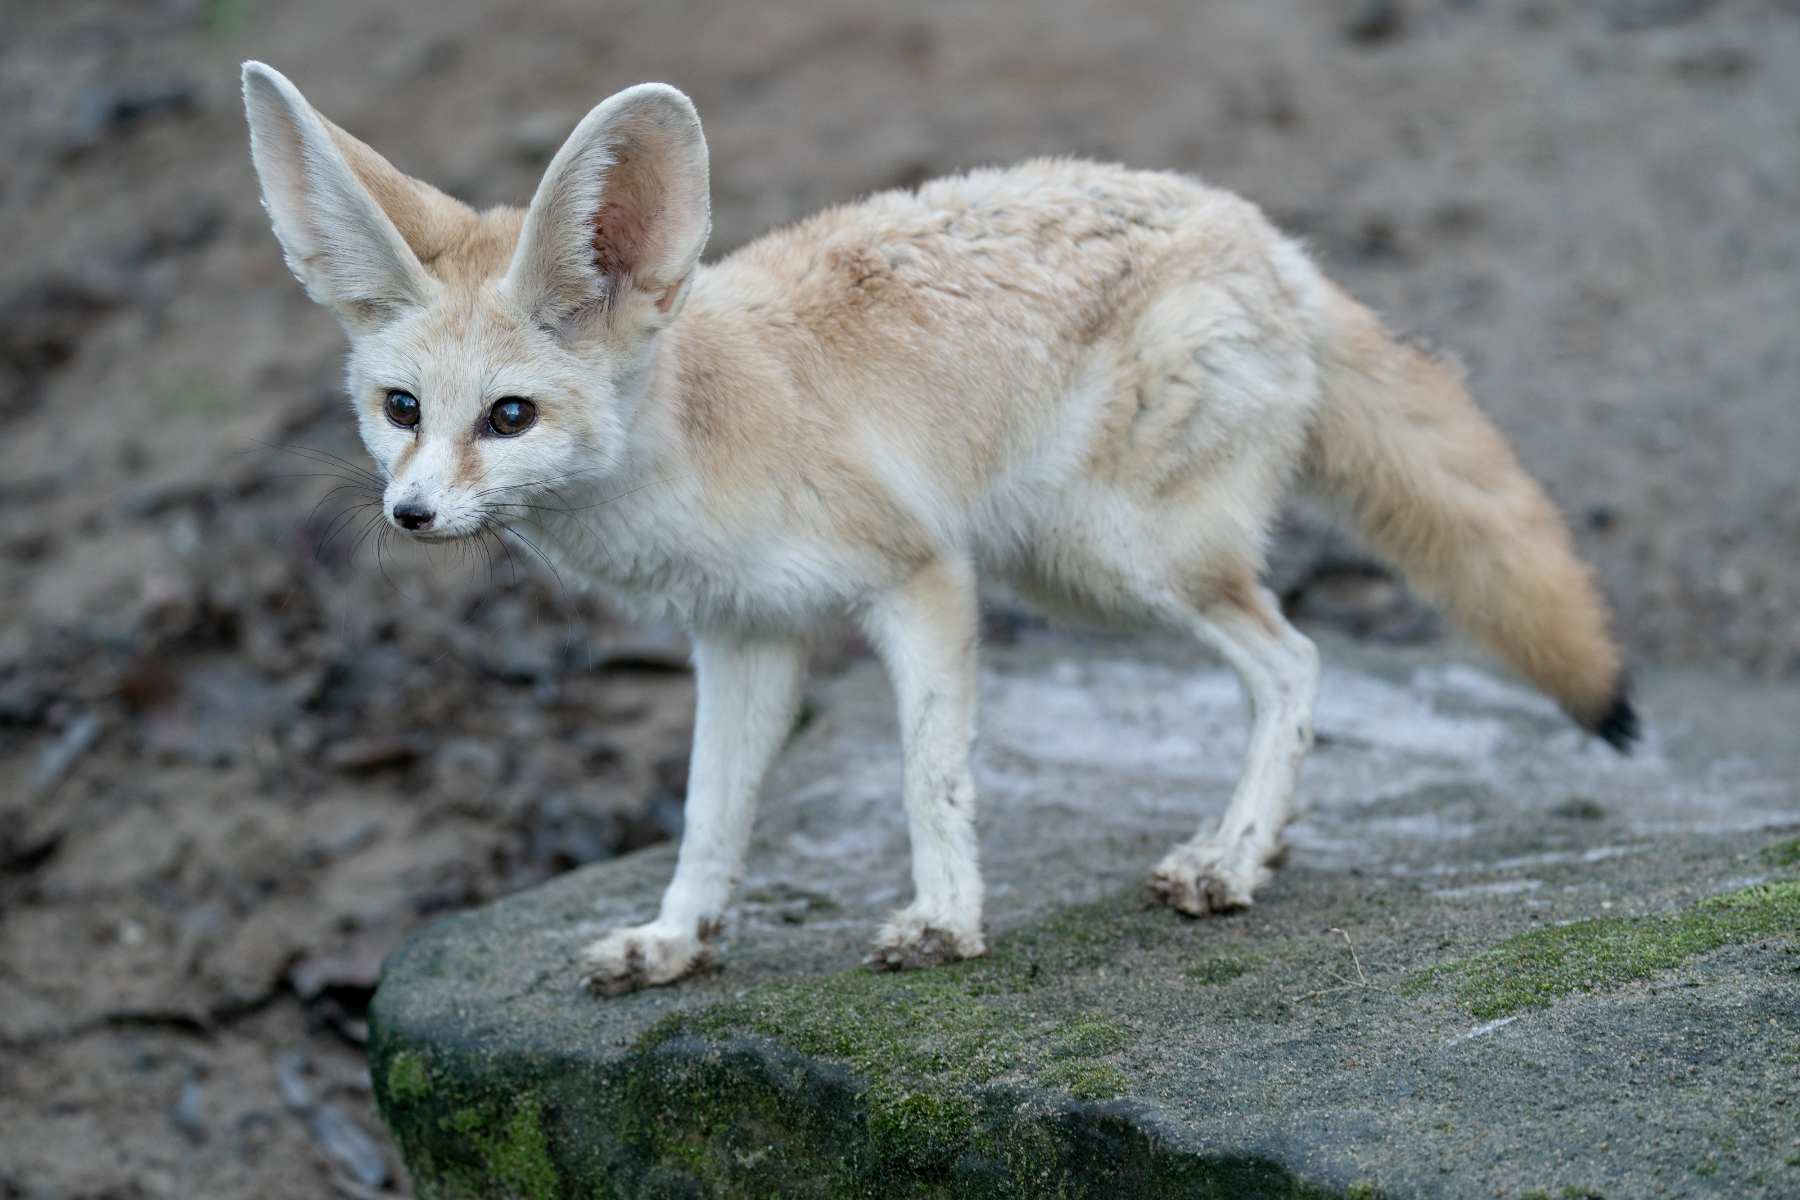 Fennec fox is on the rock